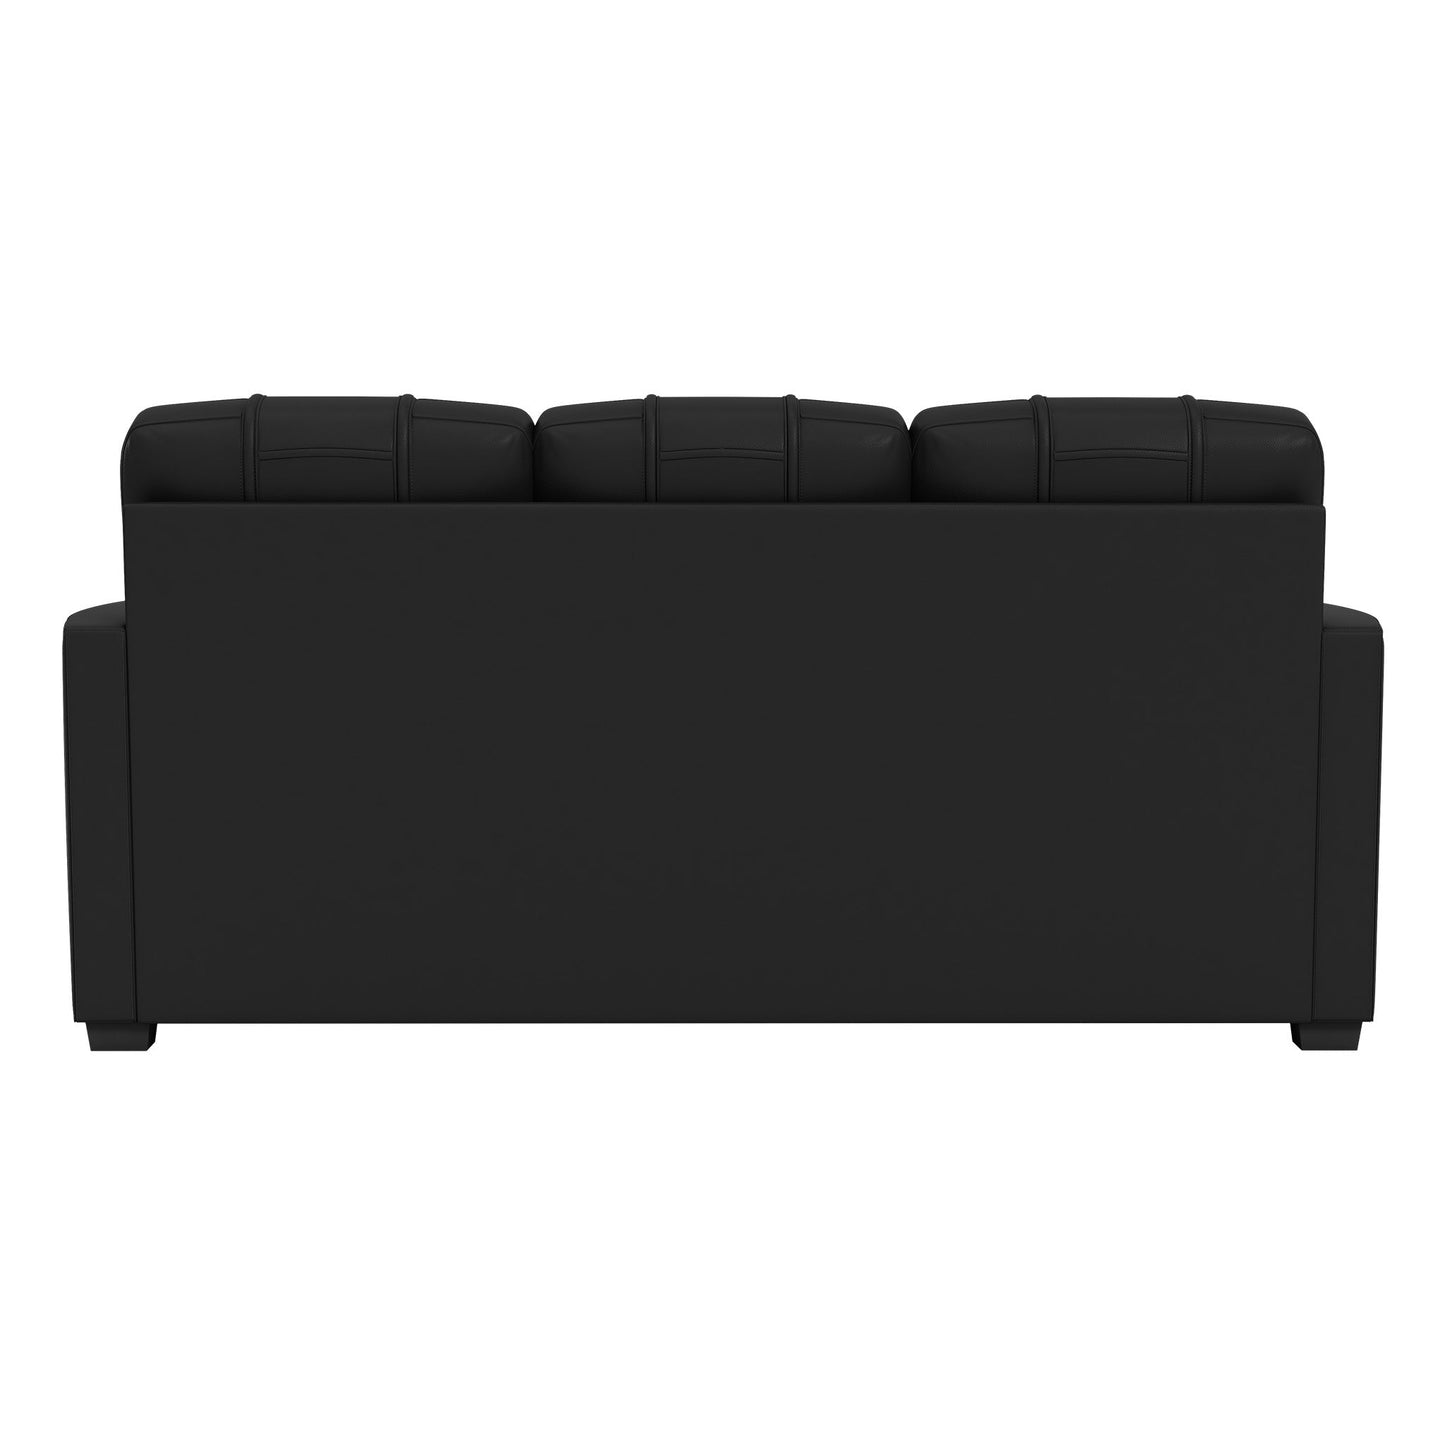 Silver Sofa with Notre Dame Primary Logo